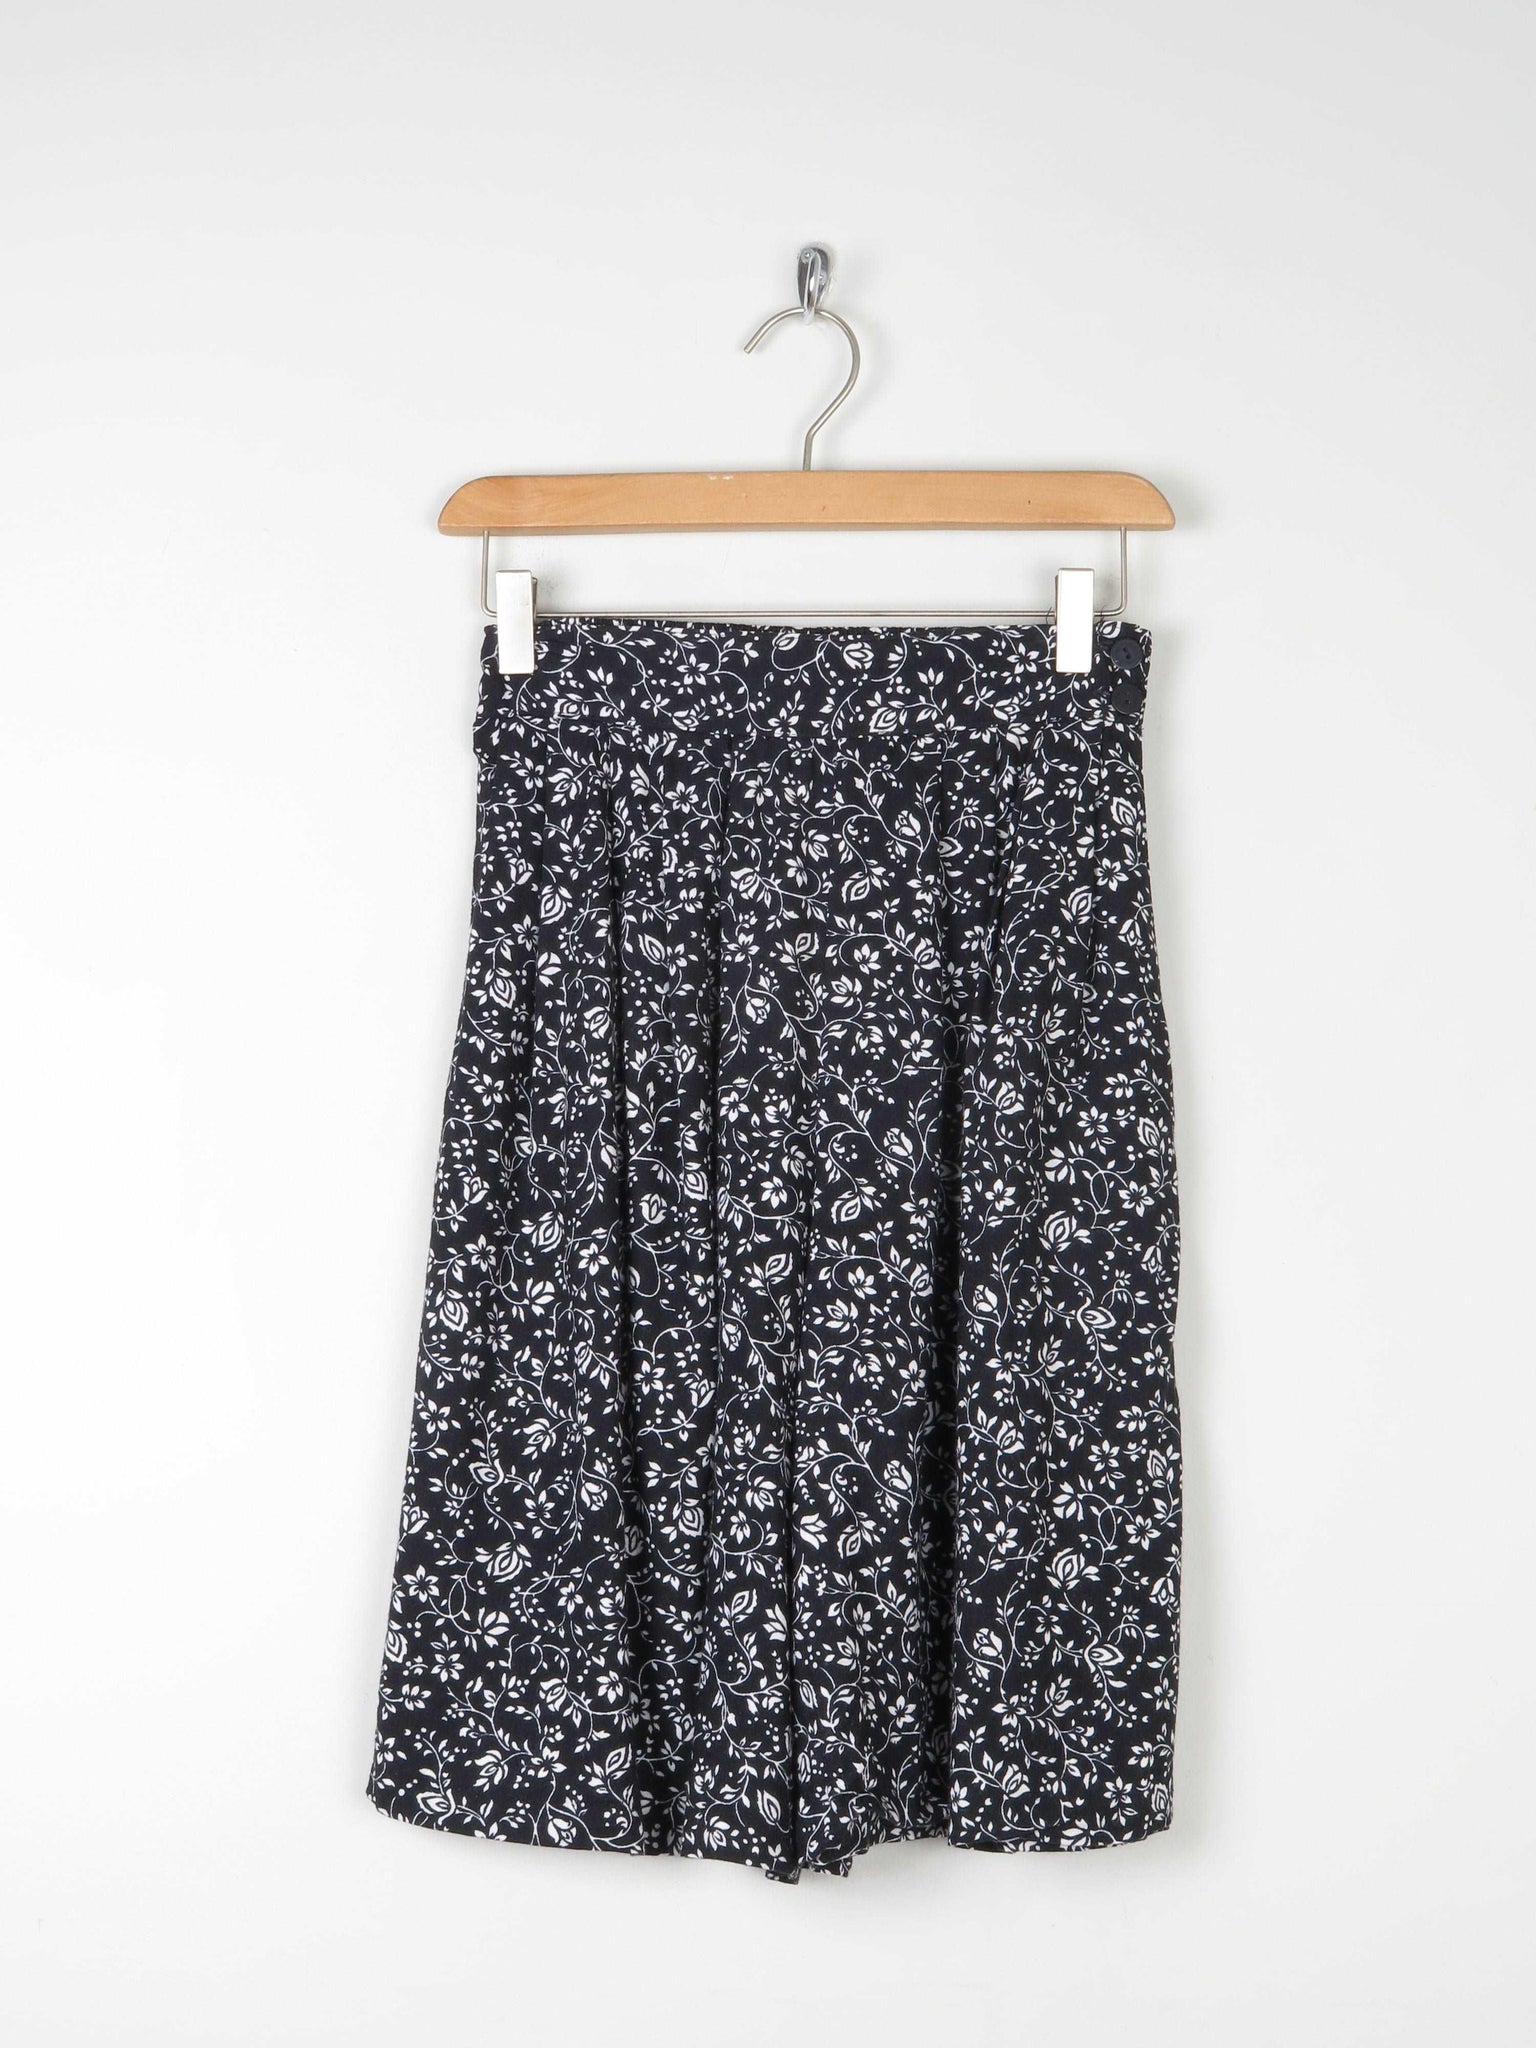 Black Bermuda Floral Shorts XS/S 8/10 Approx - The Harlequin